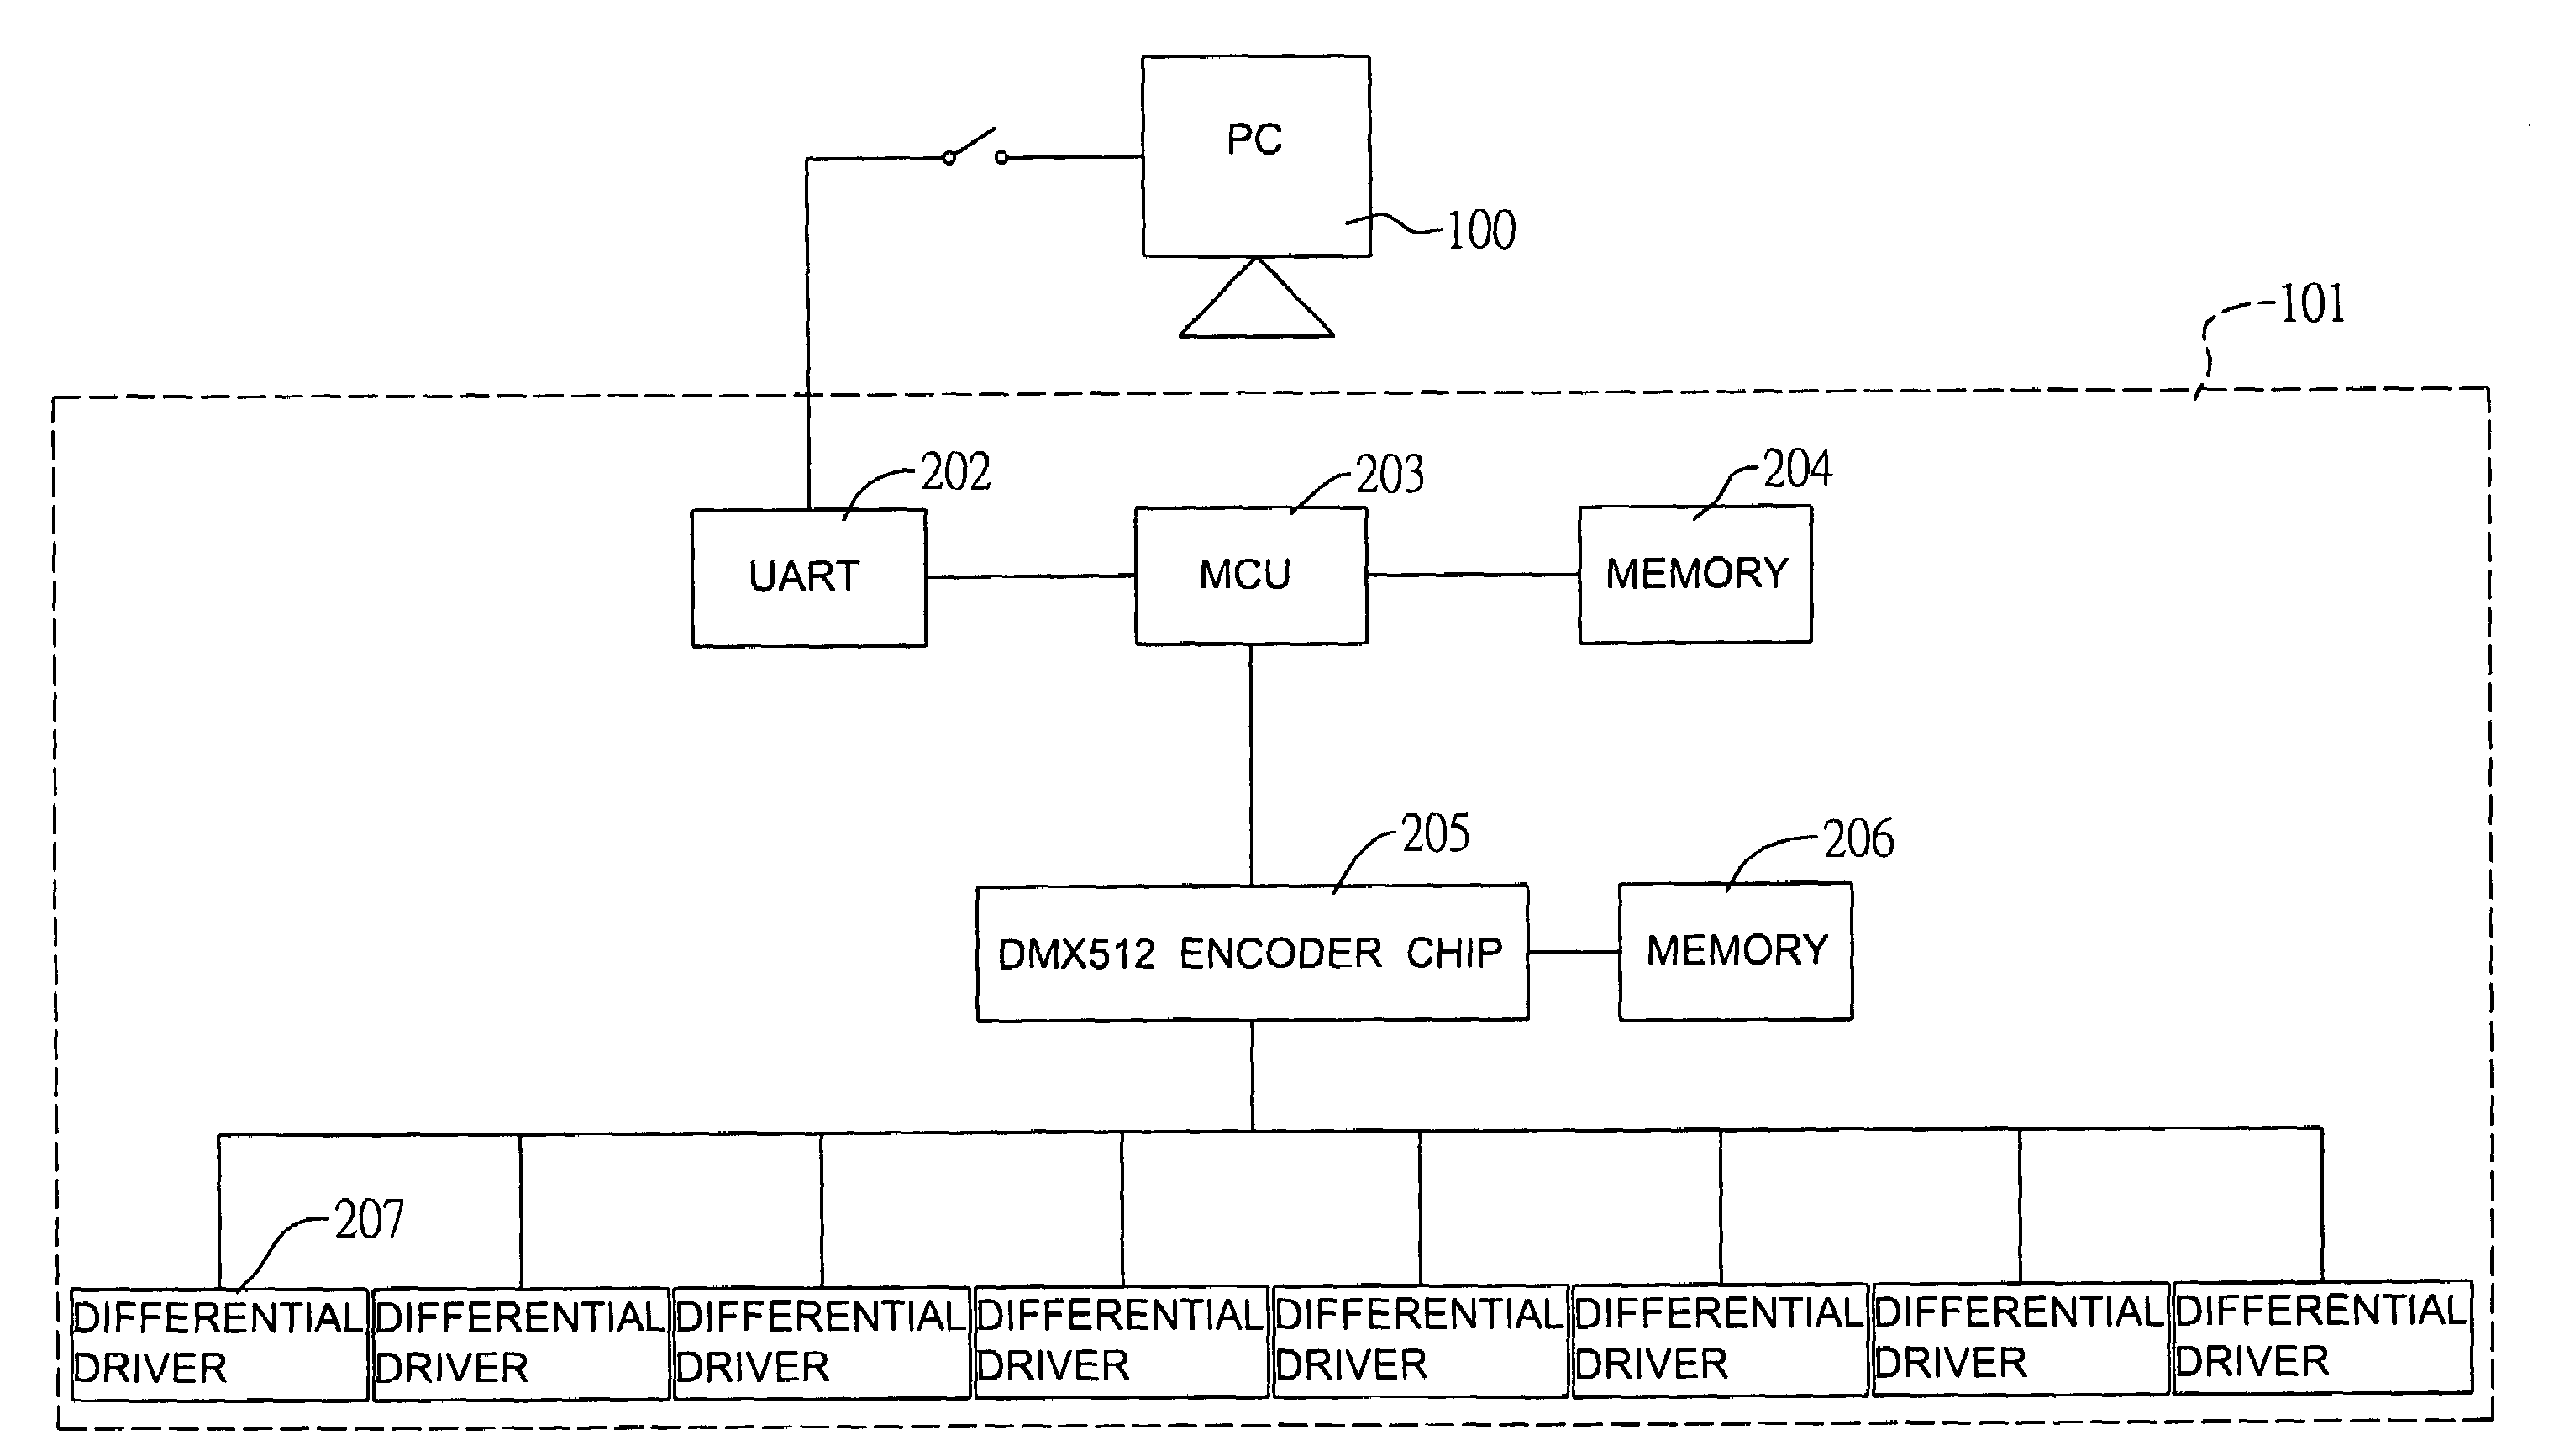 System for controlling LED devices